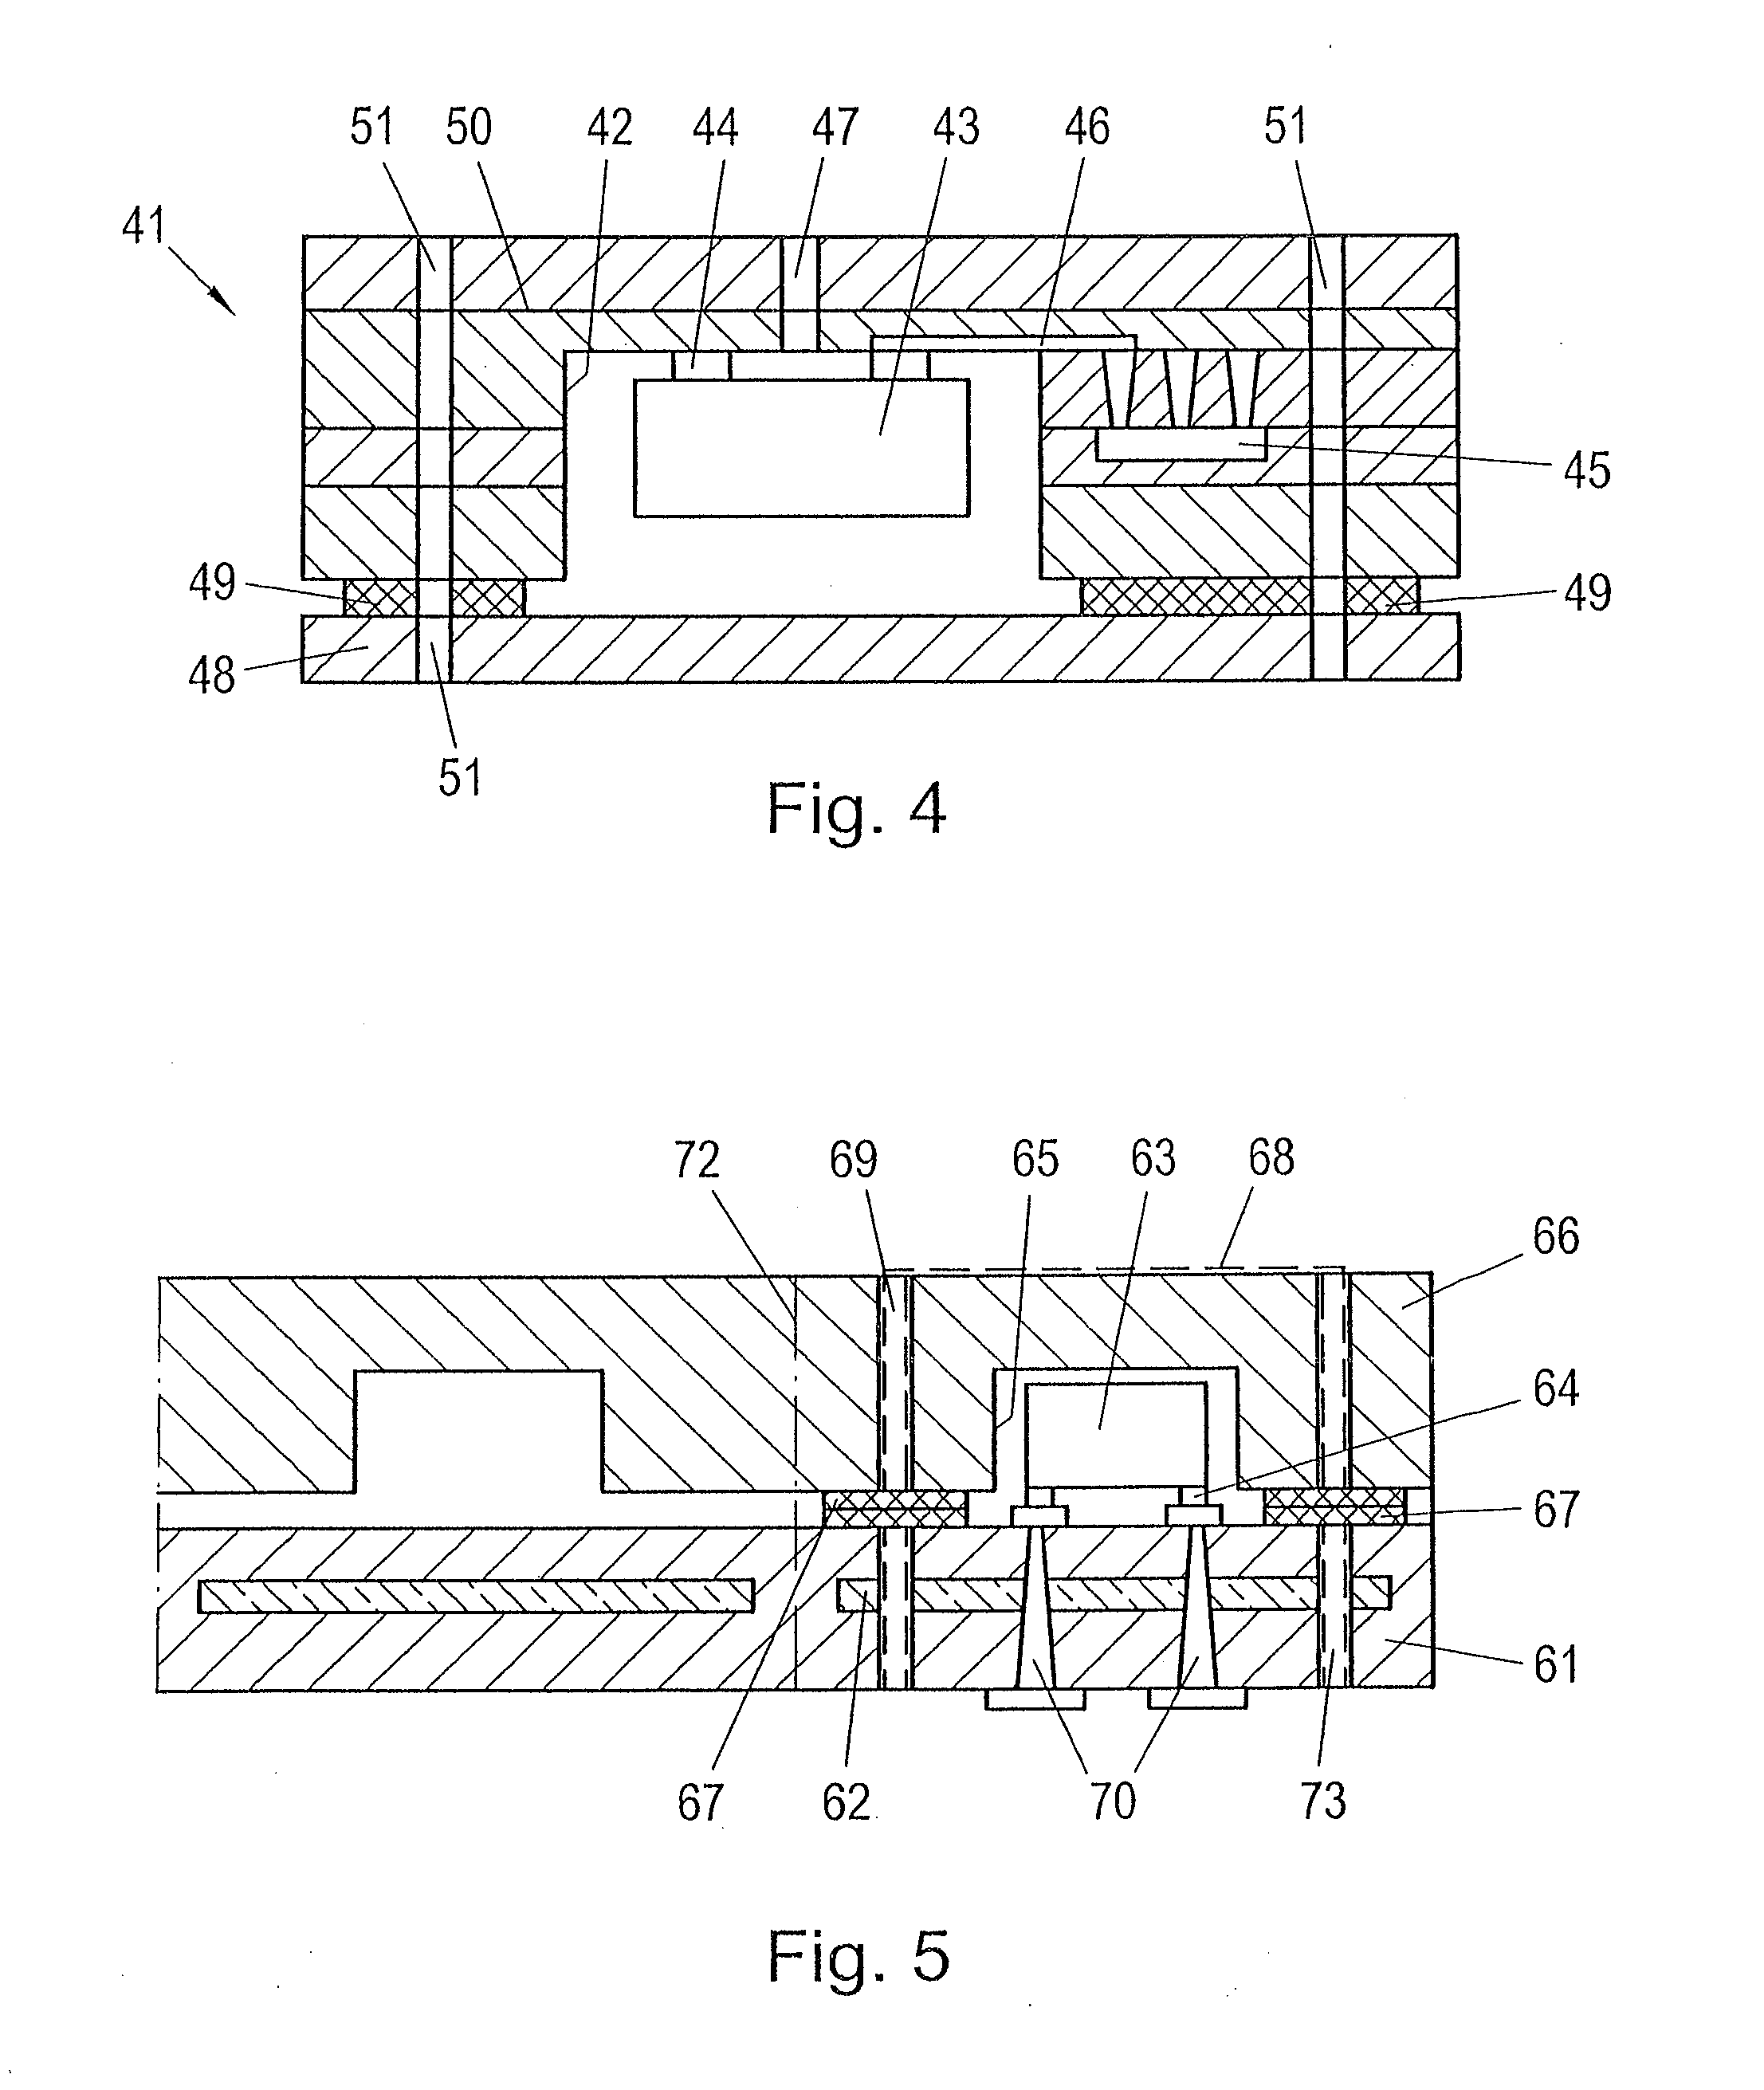 Method for integrating an electronic component into a printed circuit board, and printed circuit board comprising an electronic component integrated therein